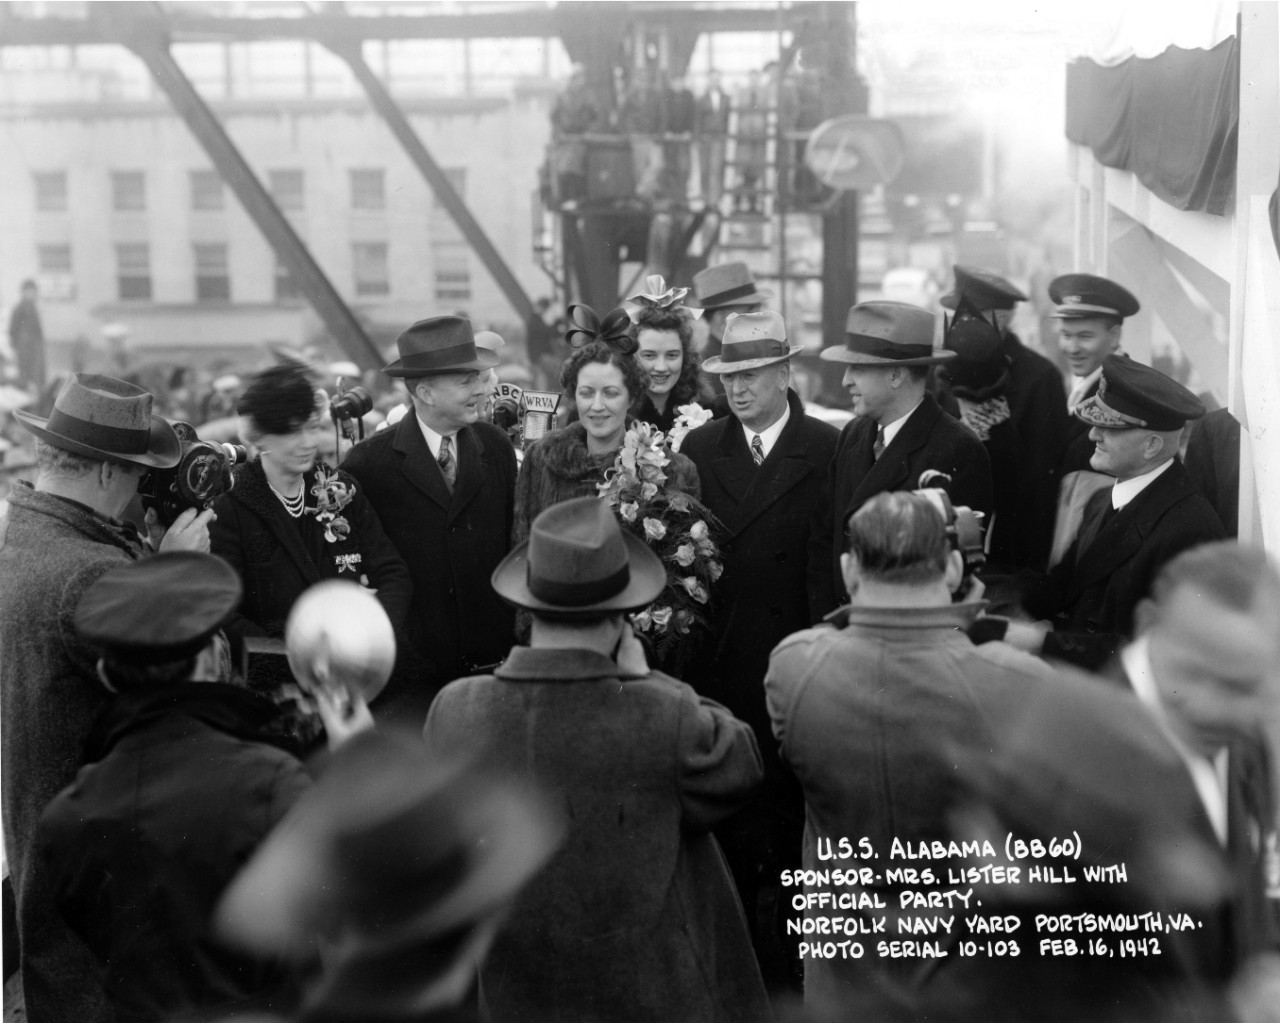 Sponsor Mrs. Lister Hill with officials at launching of USS Alabama (BB-60) at Norfolk Navy Yard, Portsmouth, VA. February 16, 1942. From the LCDR Carlyle M. Terry Collection.